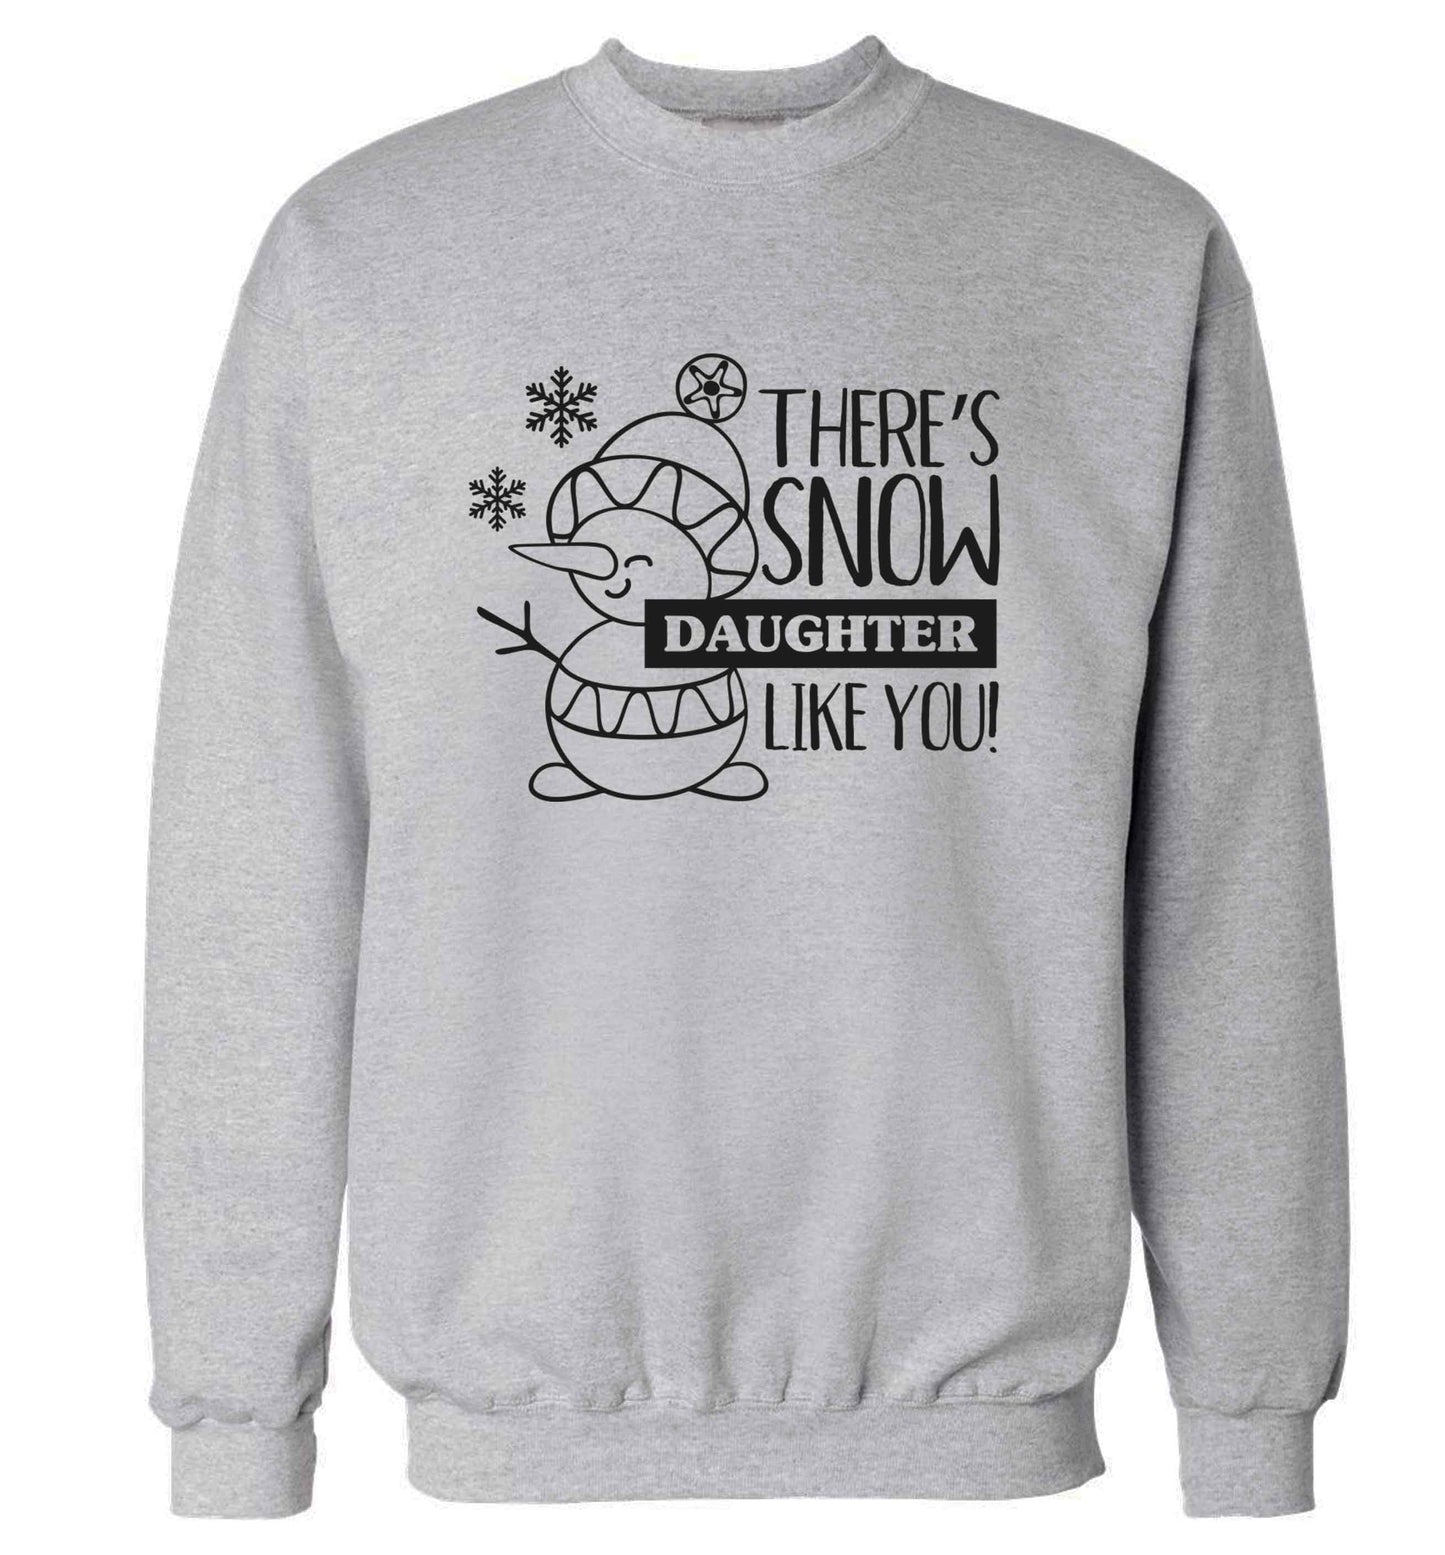 There's snow daughter like you adult's unisex grey sweater 2XL